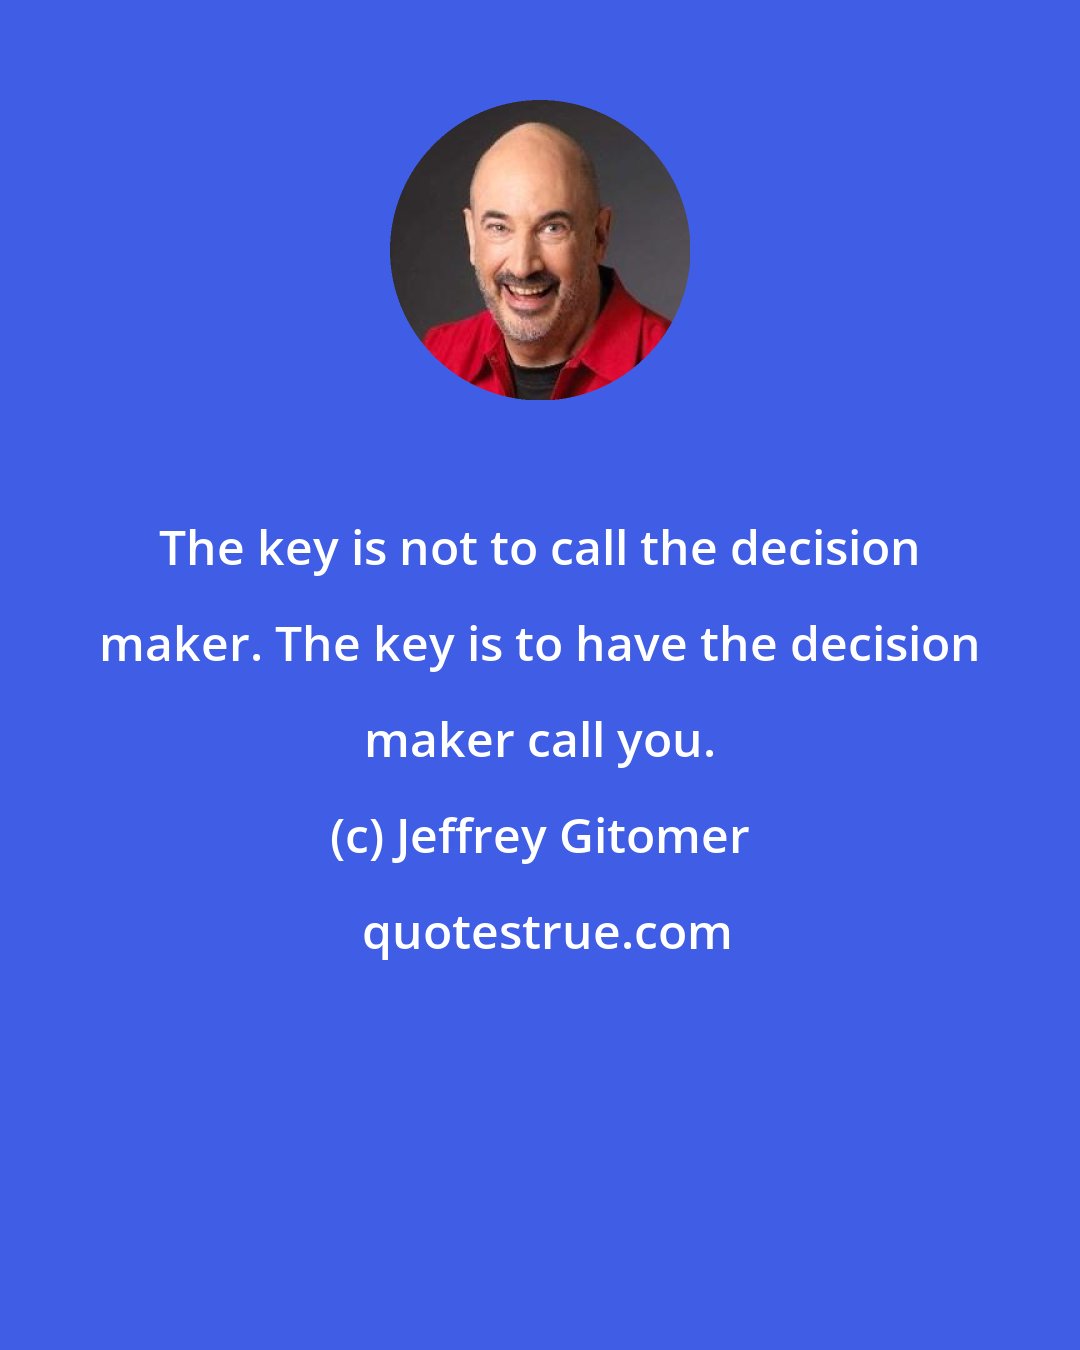 Jeffrey Gitomer: The key is not to call the decision maker. The key is to have the decision maker call you.